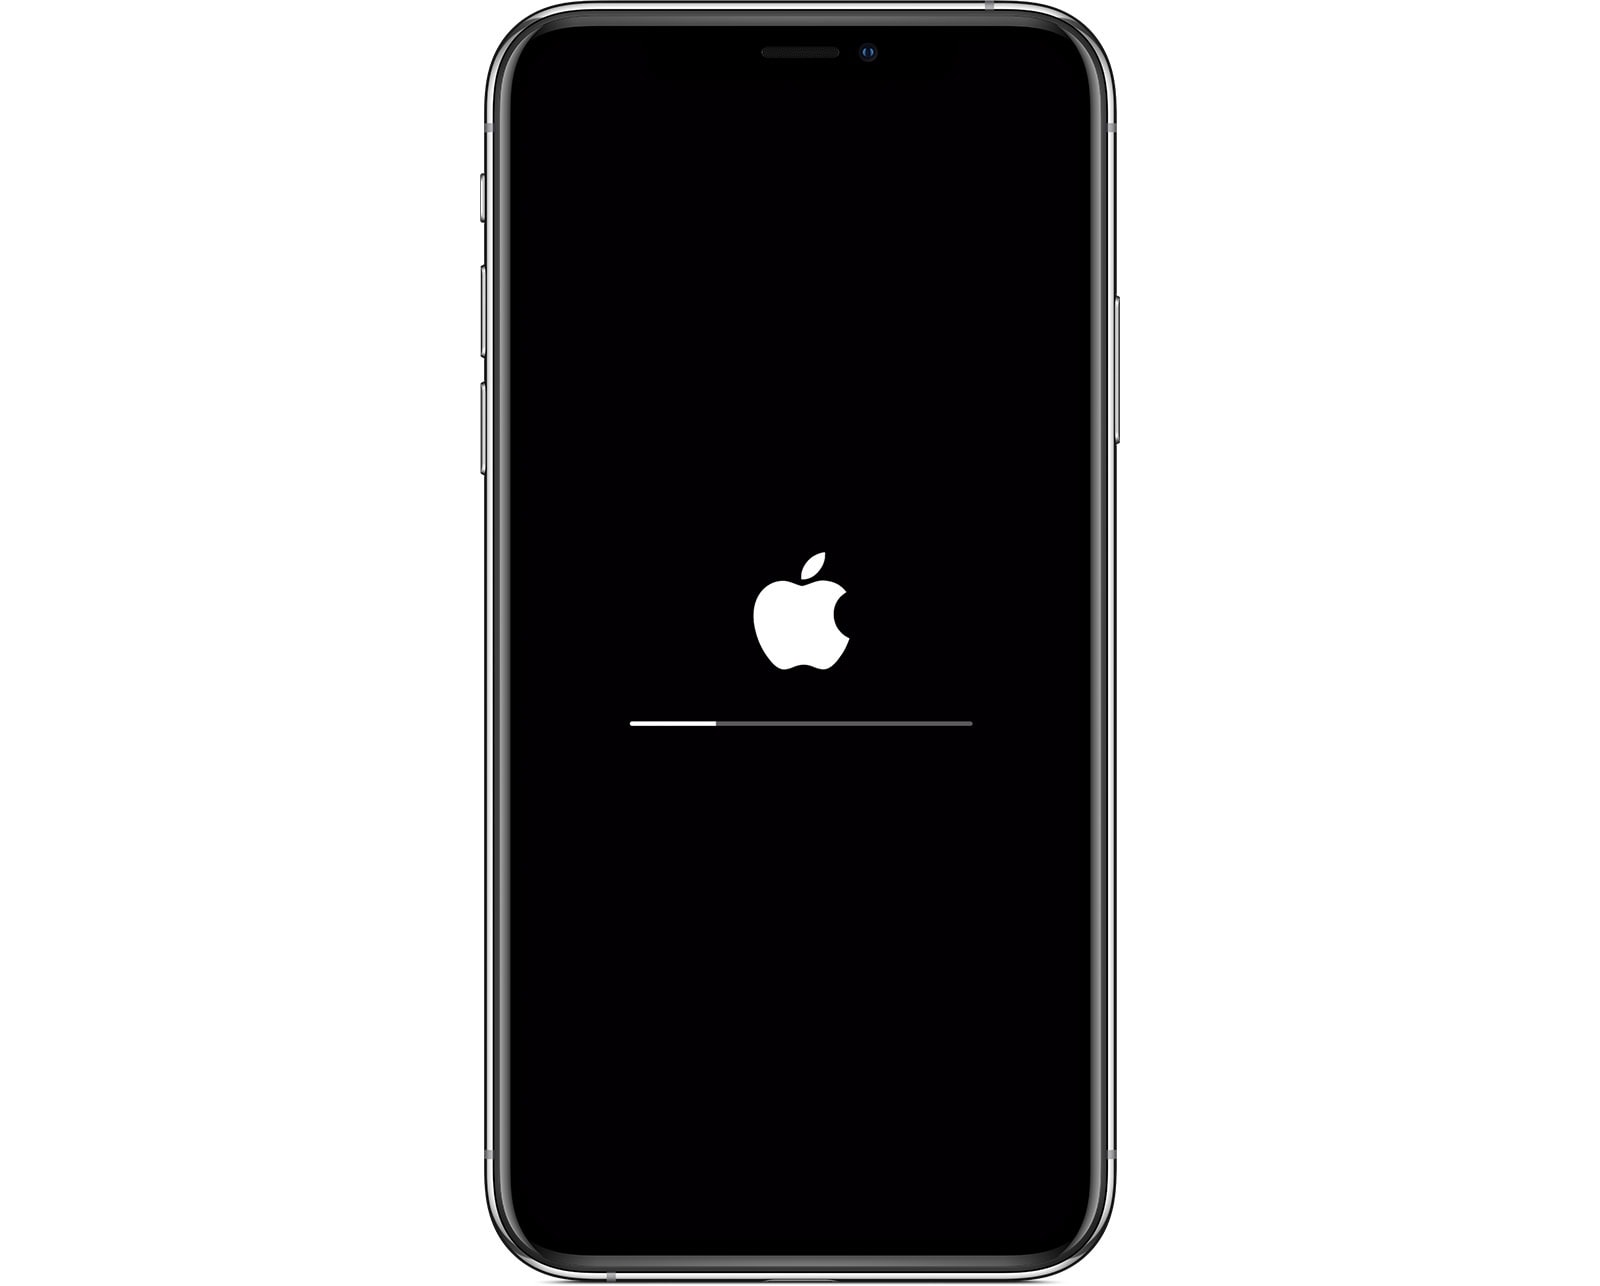 device-shutdown-turning-off-iphone-14-without-screen-interaction